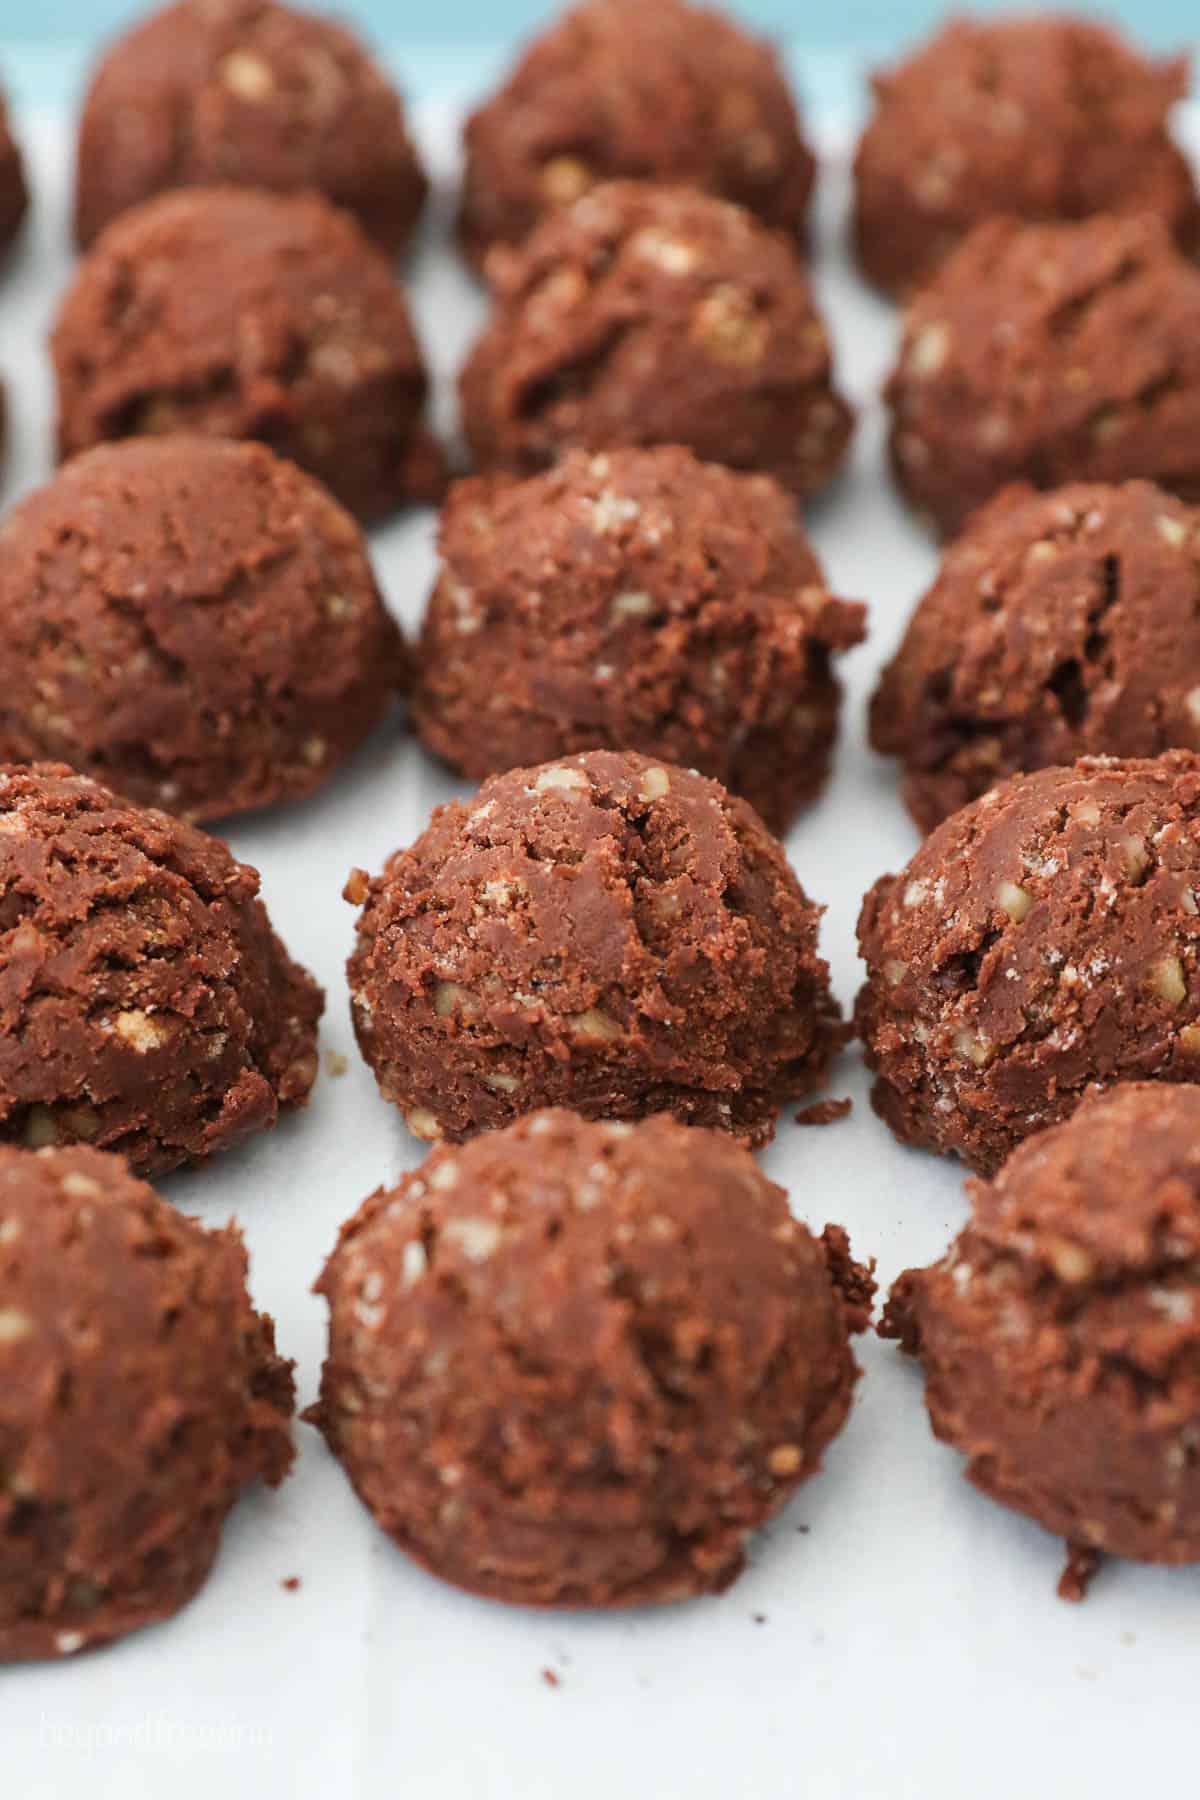 Chilled and shaped rum balls lined up on a piece of parchment paper